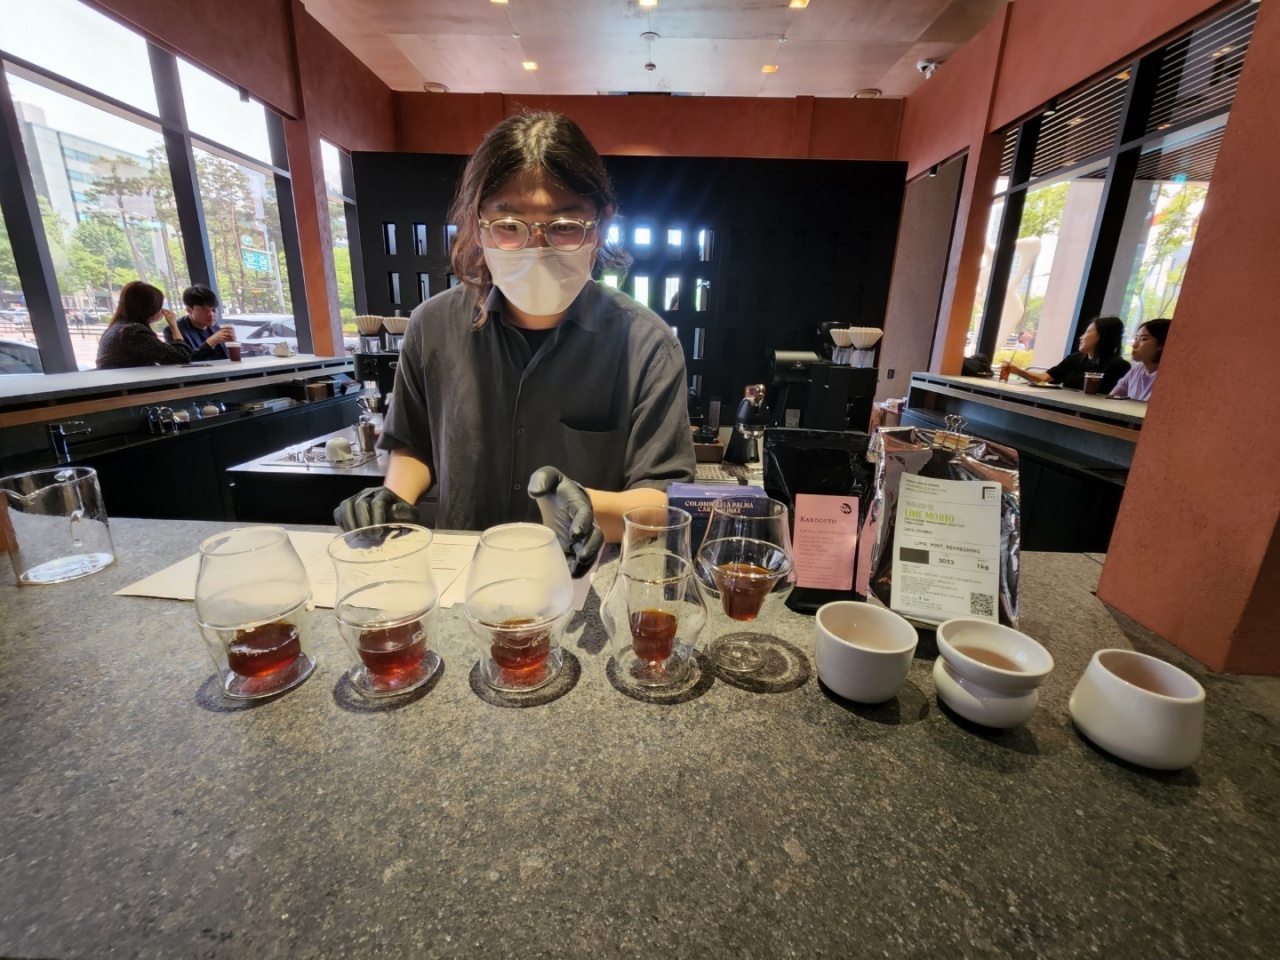 A staff member explains flavors of drip coffee served in eight different cups at Conflict Store. The coffee parlor in Jamsil-dong, Songpa-gu, Seoul, offers three tasting courses featuring different brews. (Choi Jae-hee / The Korea Herald)